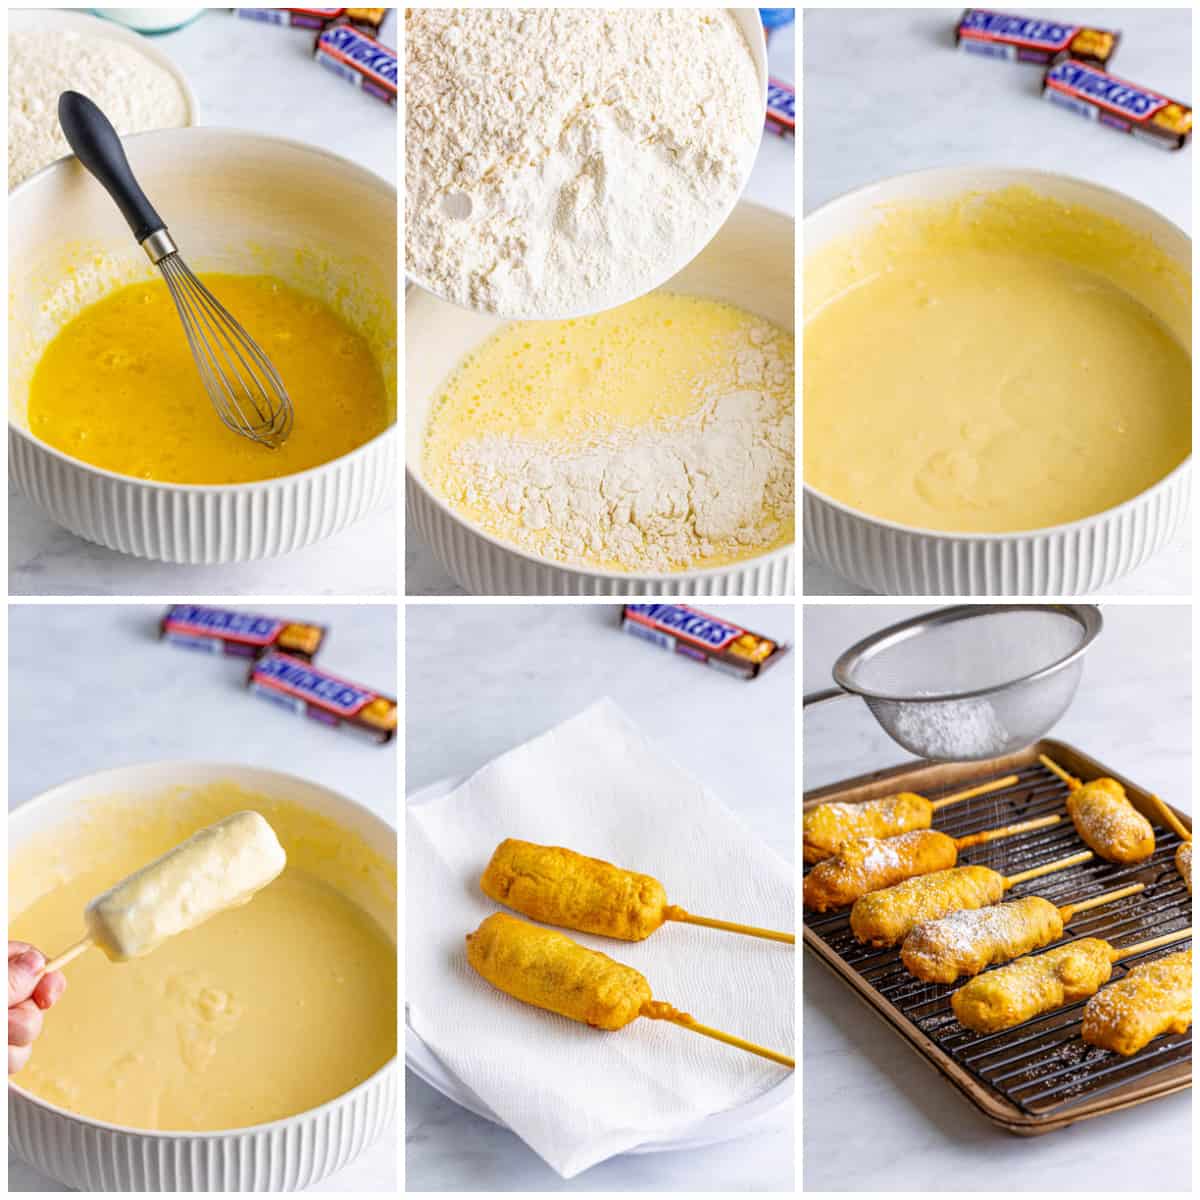 Step by step photos on how to make Deep Fried Snickers.